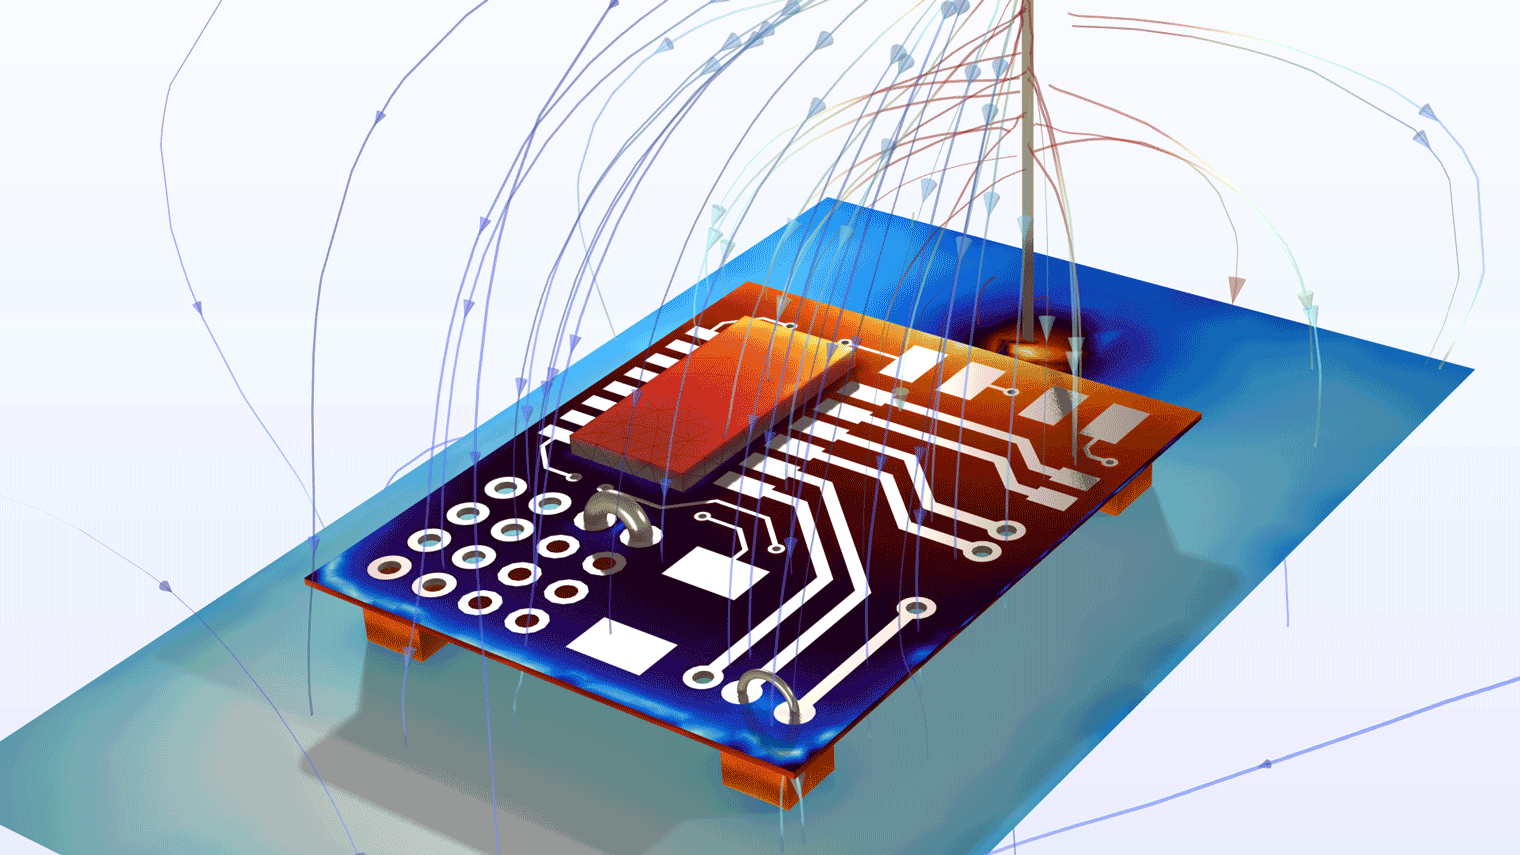 A circuit board model showing the transient electrostatic discharge effect.